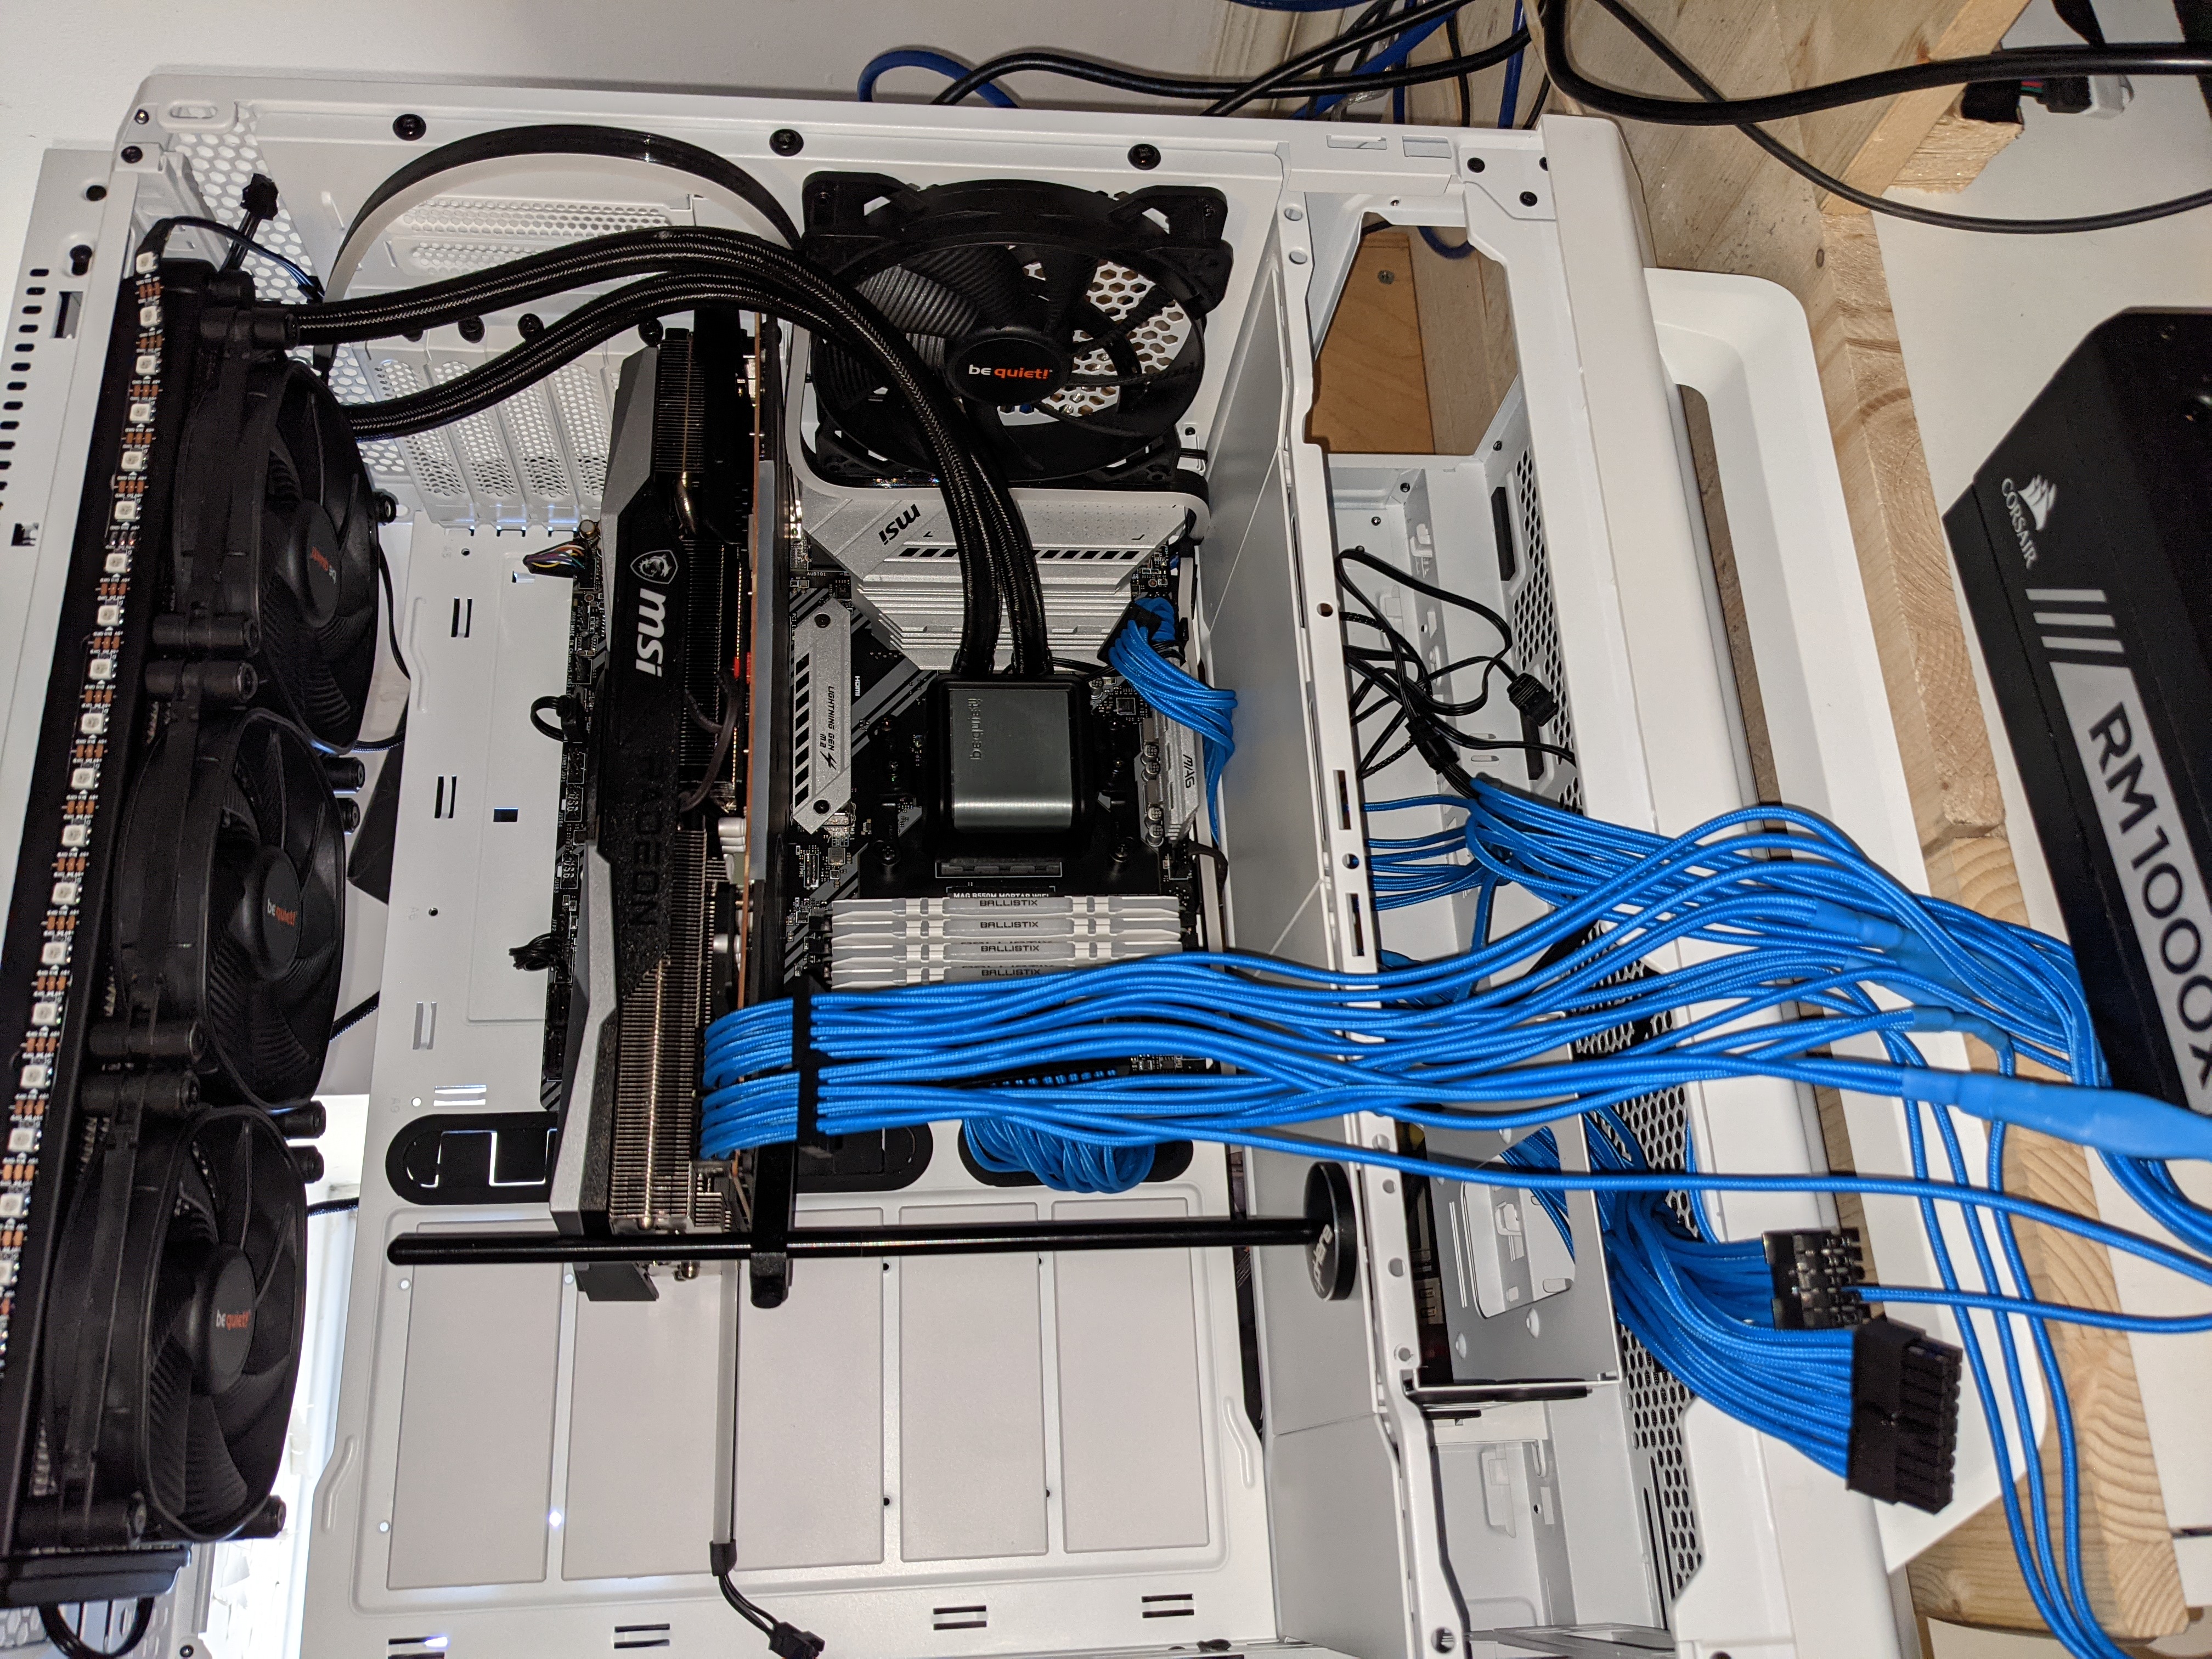 Test fitting neon and cables